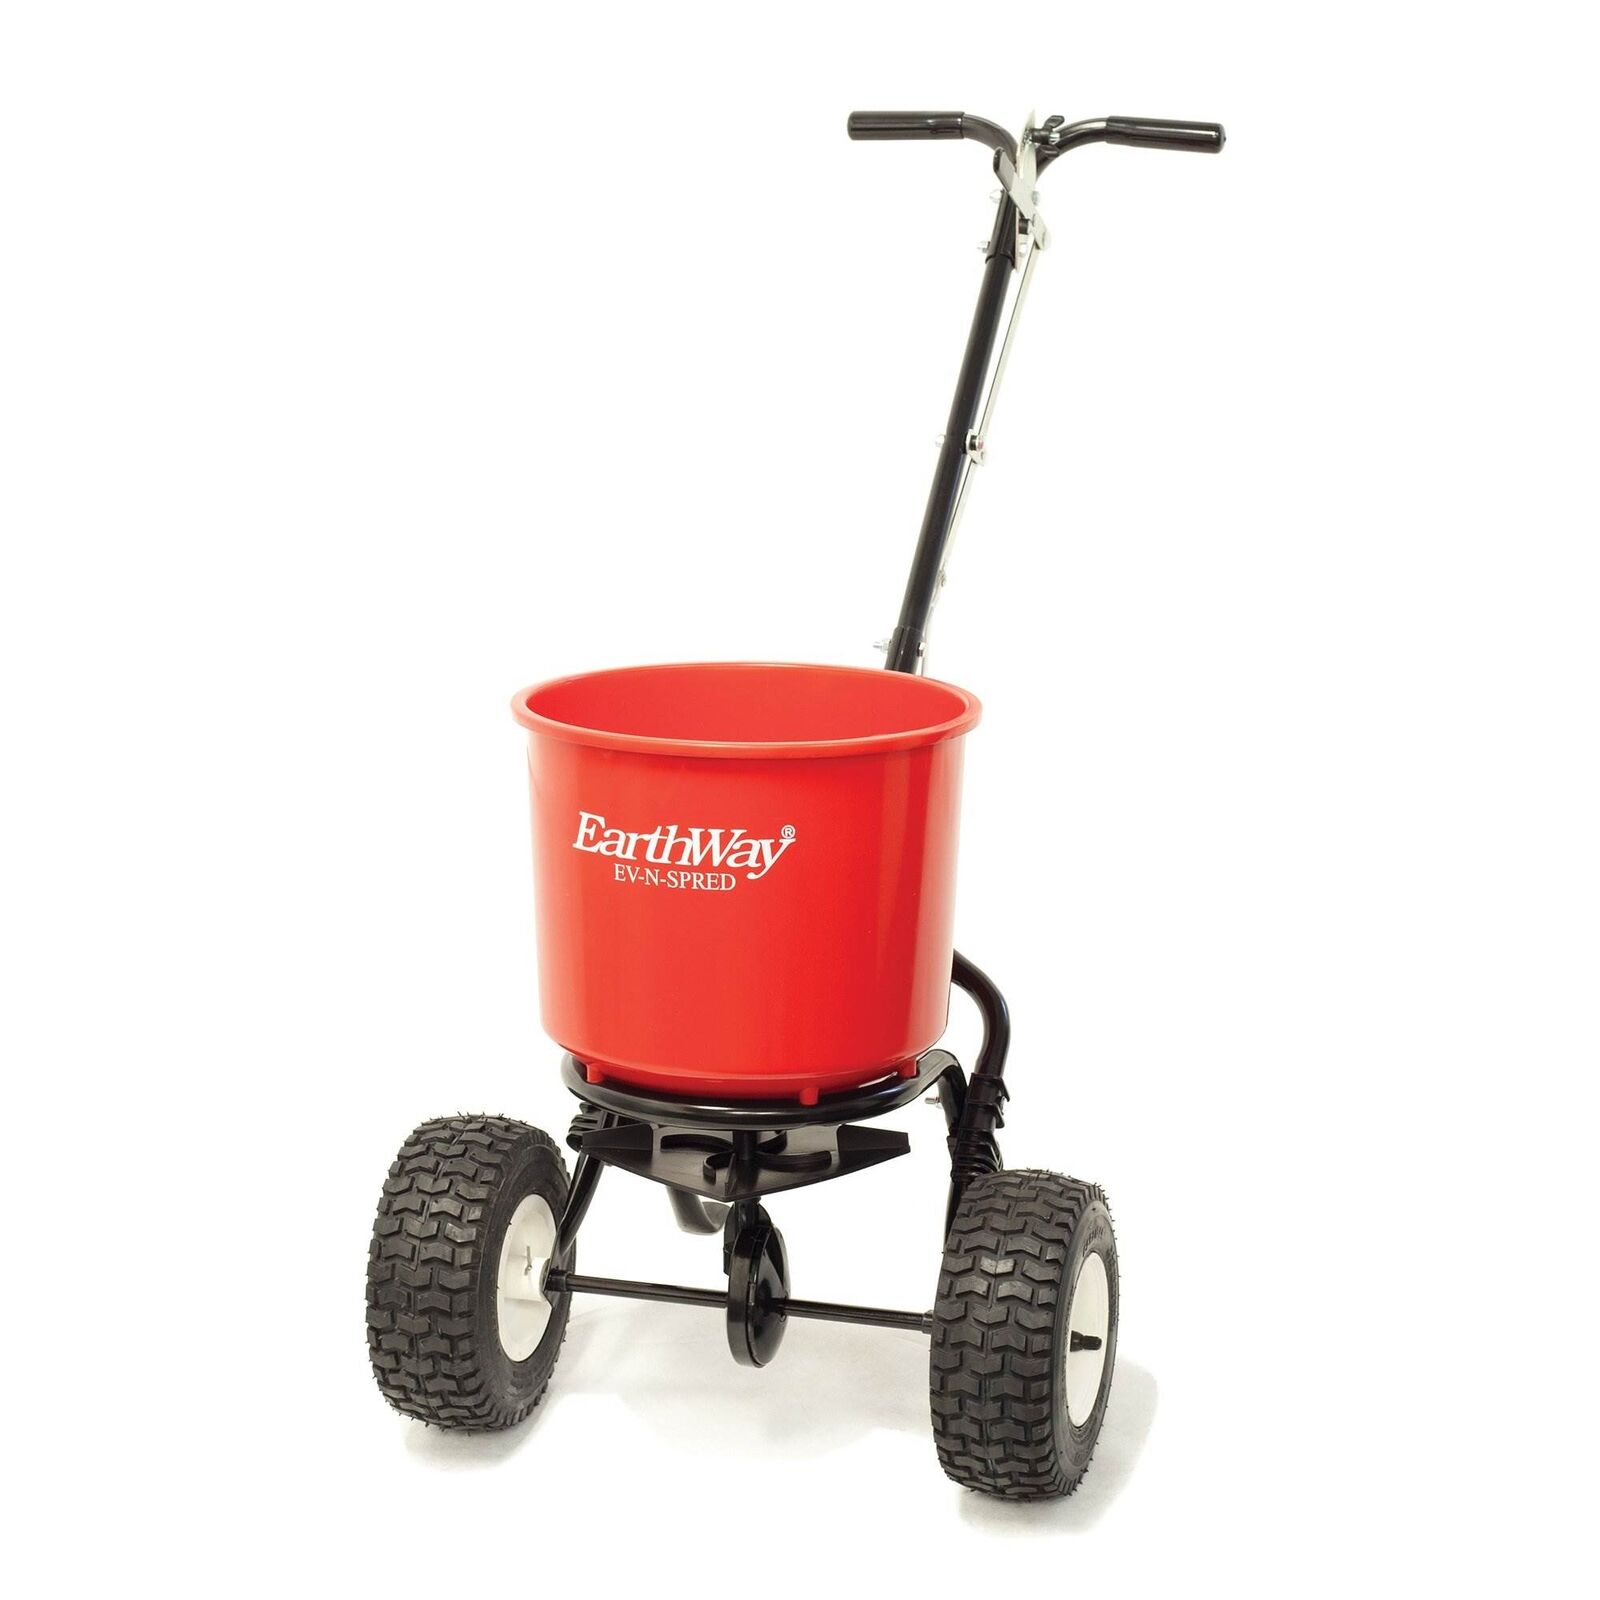 Earthway 2600a Plus 40 Pound Capacity Seed And Fertilizer Spreader (open Box)